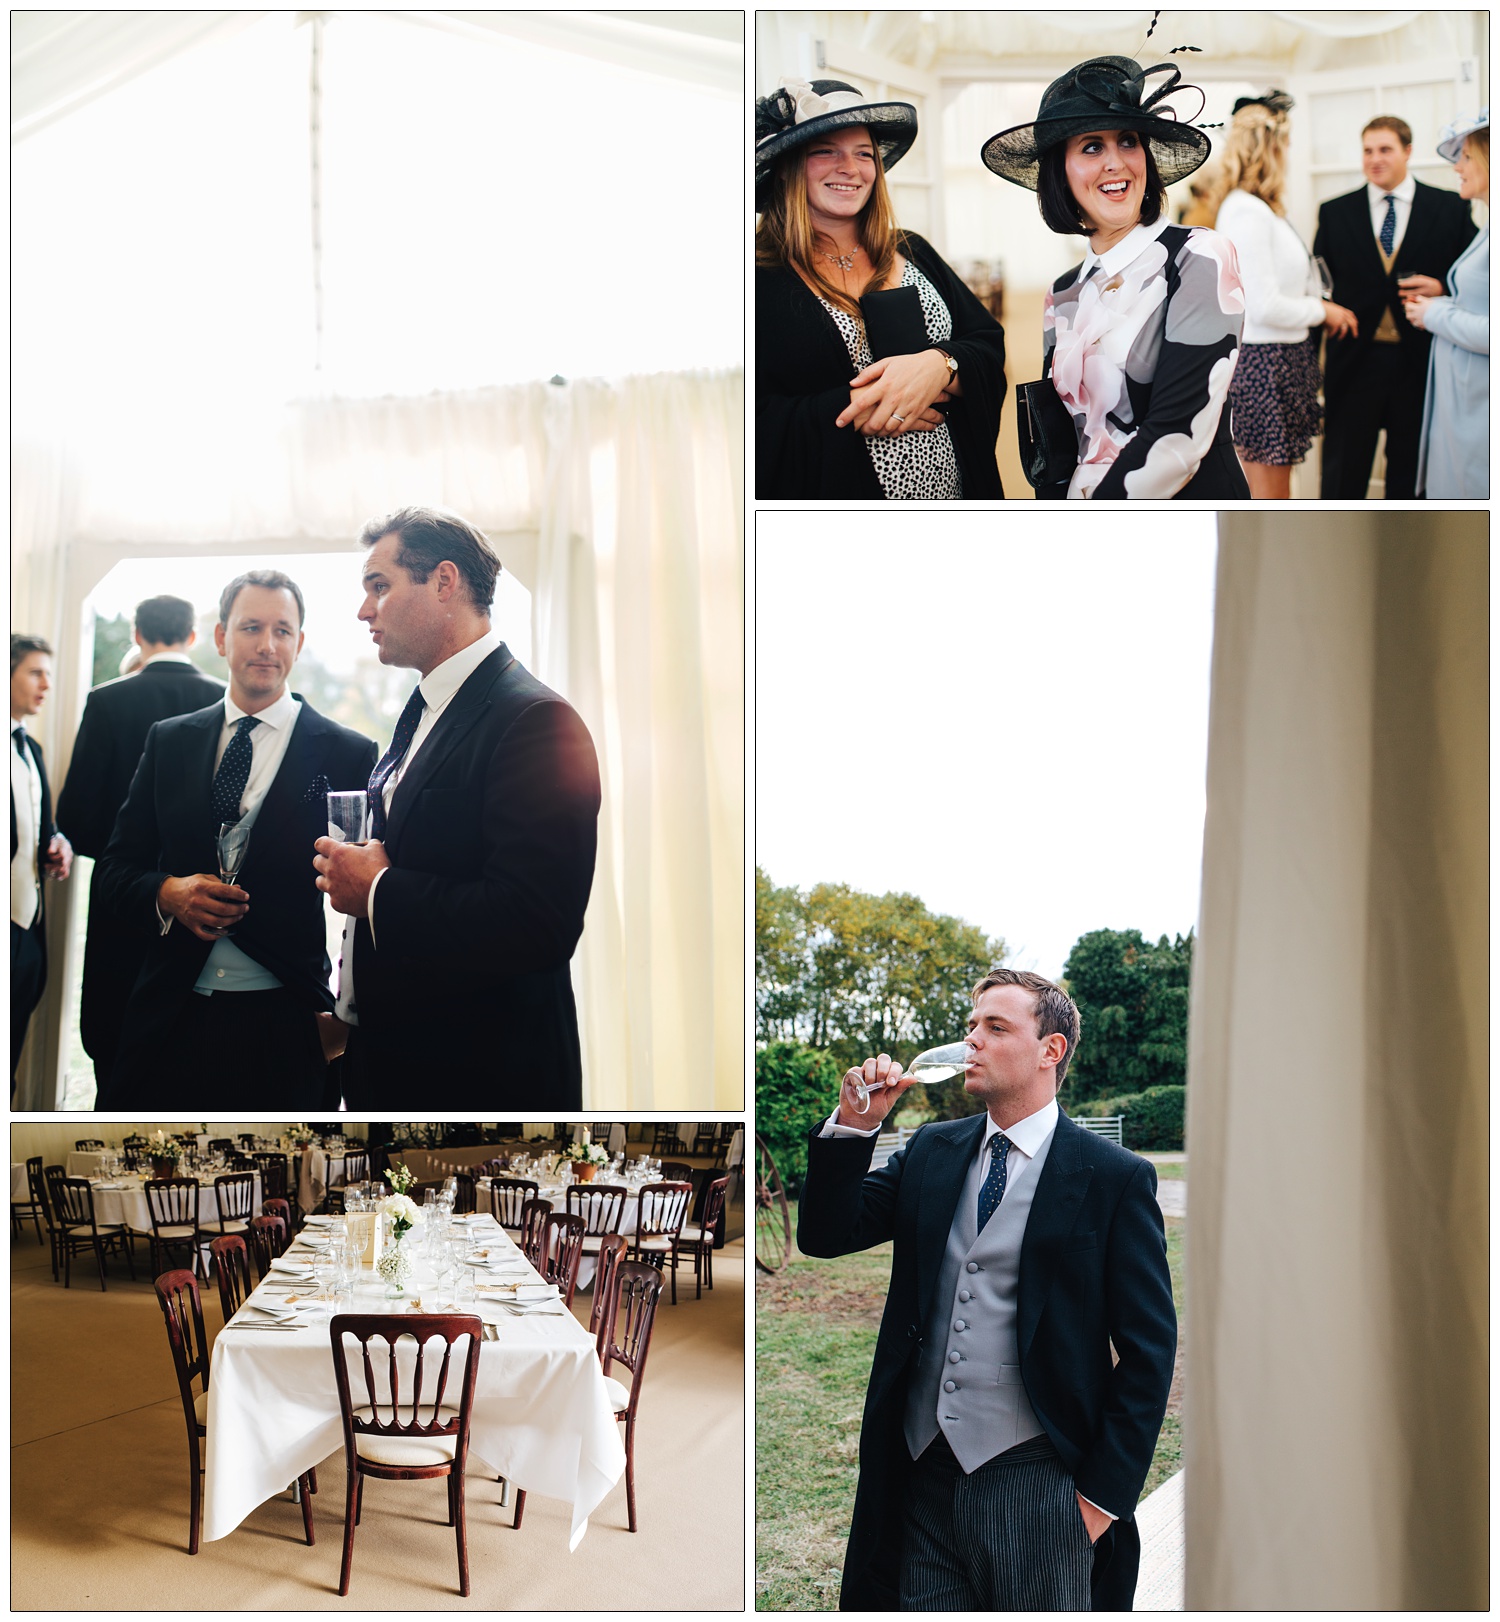 candid pictures of wedding guests having drinks.